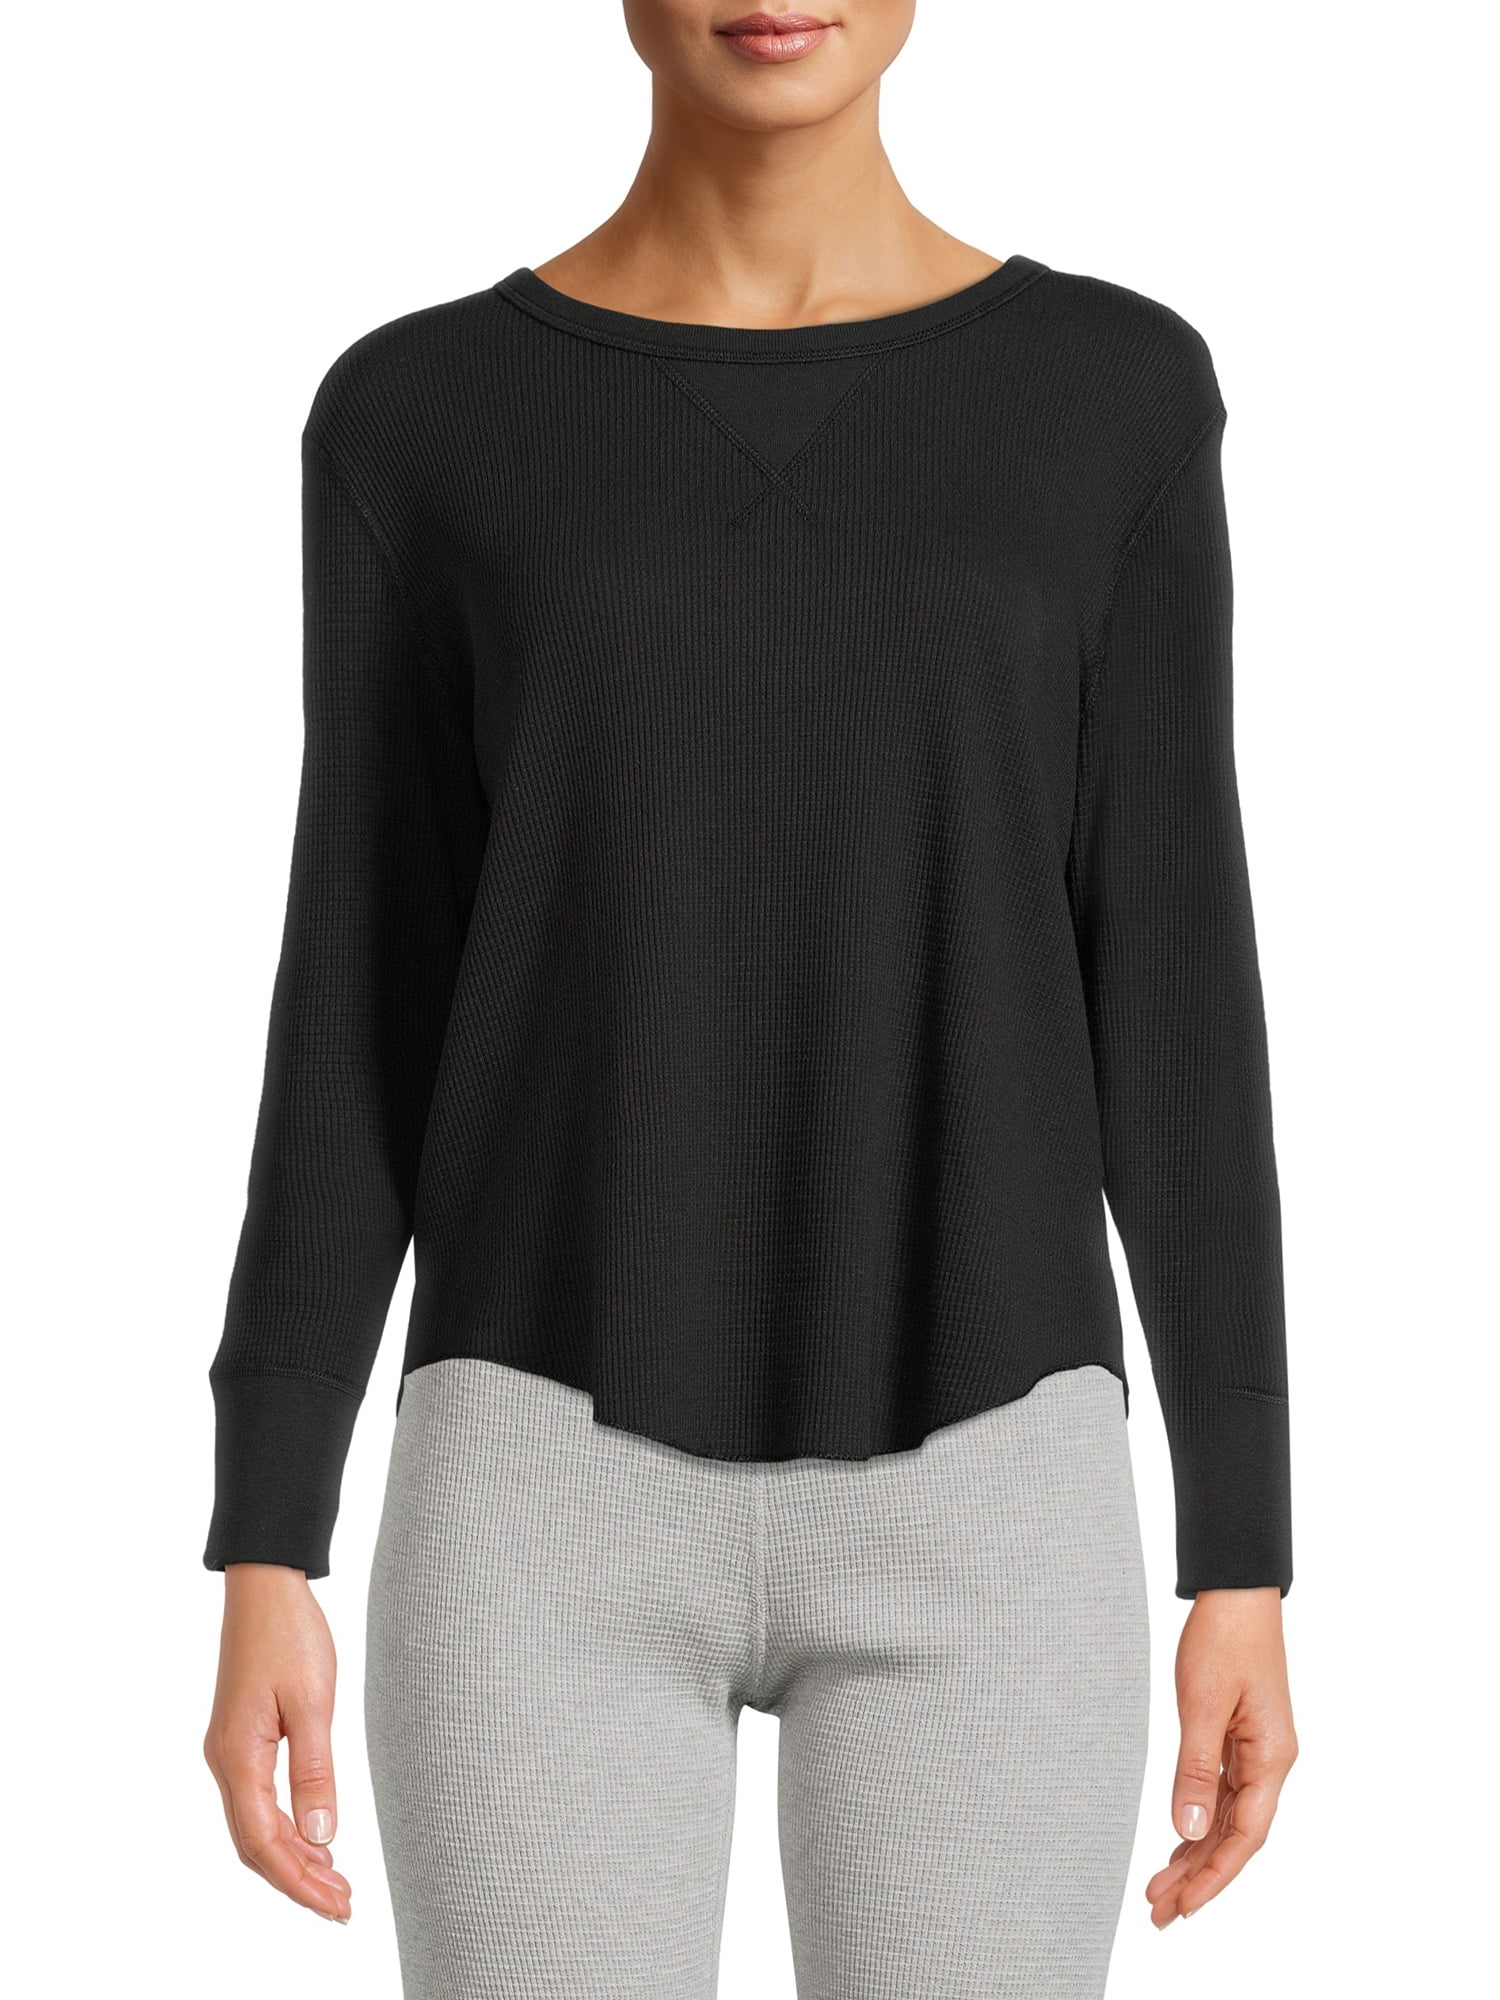 Hanes Womens Waffle Knit Thermal Pant❗️Ships directly from Hanes❗️ 